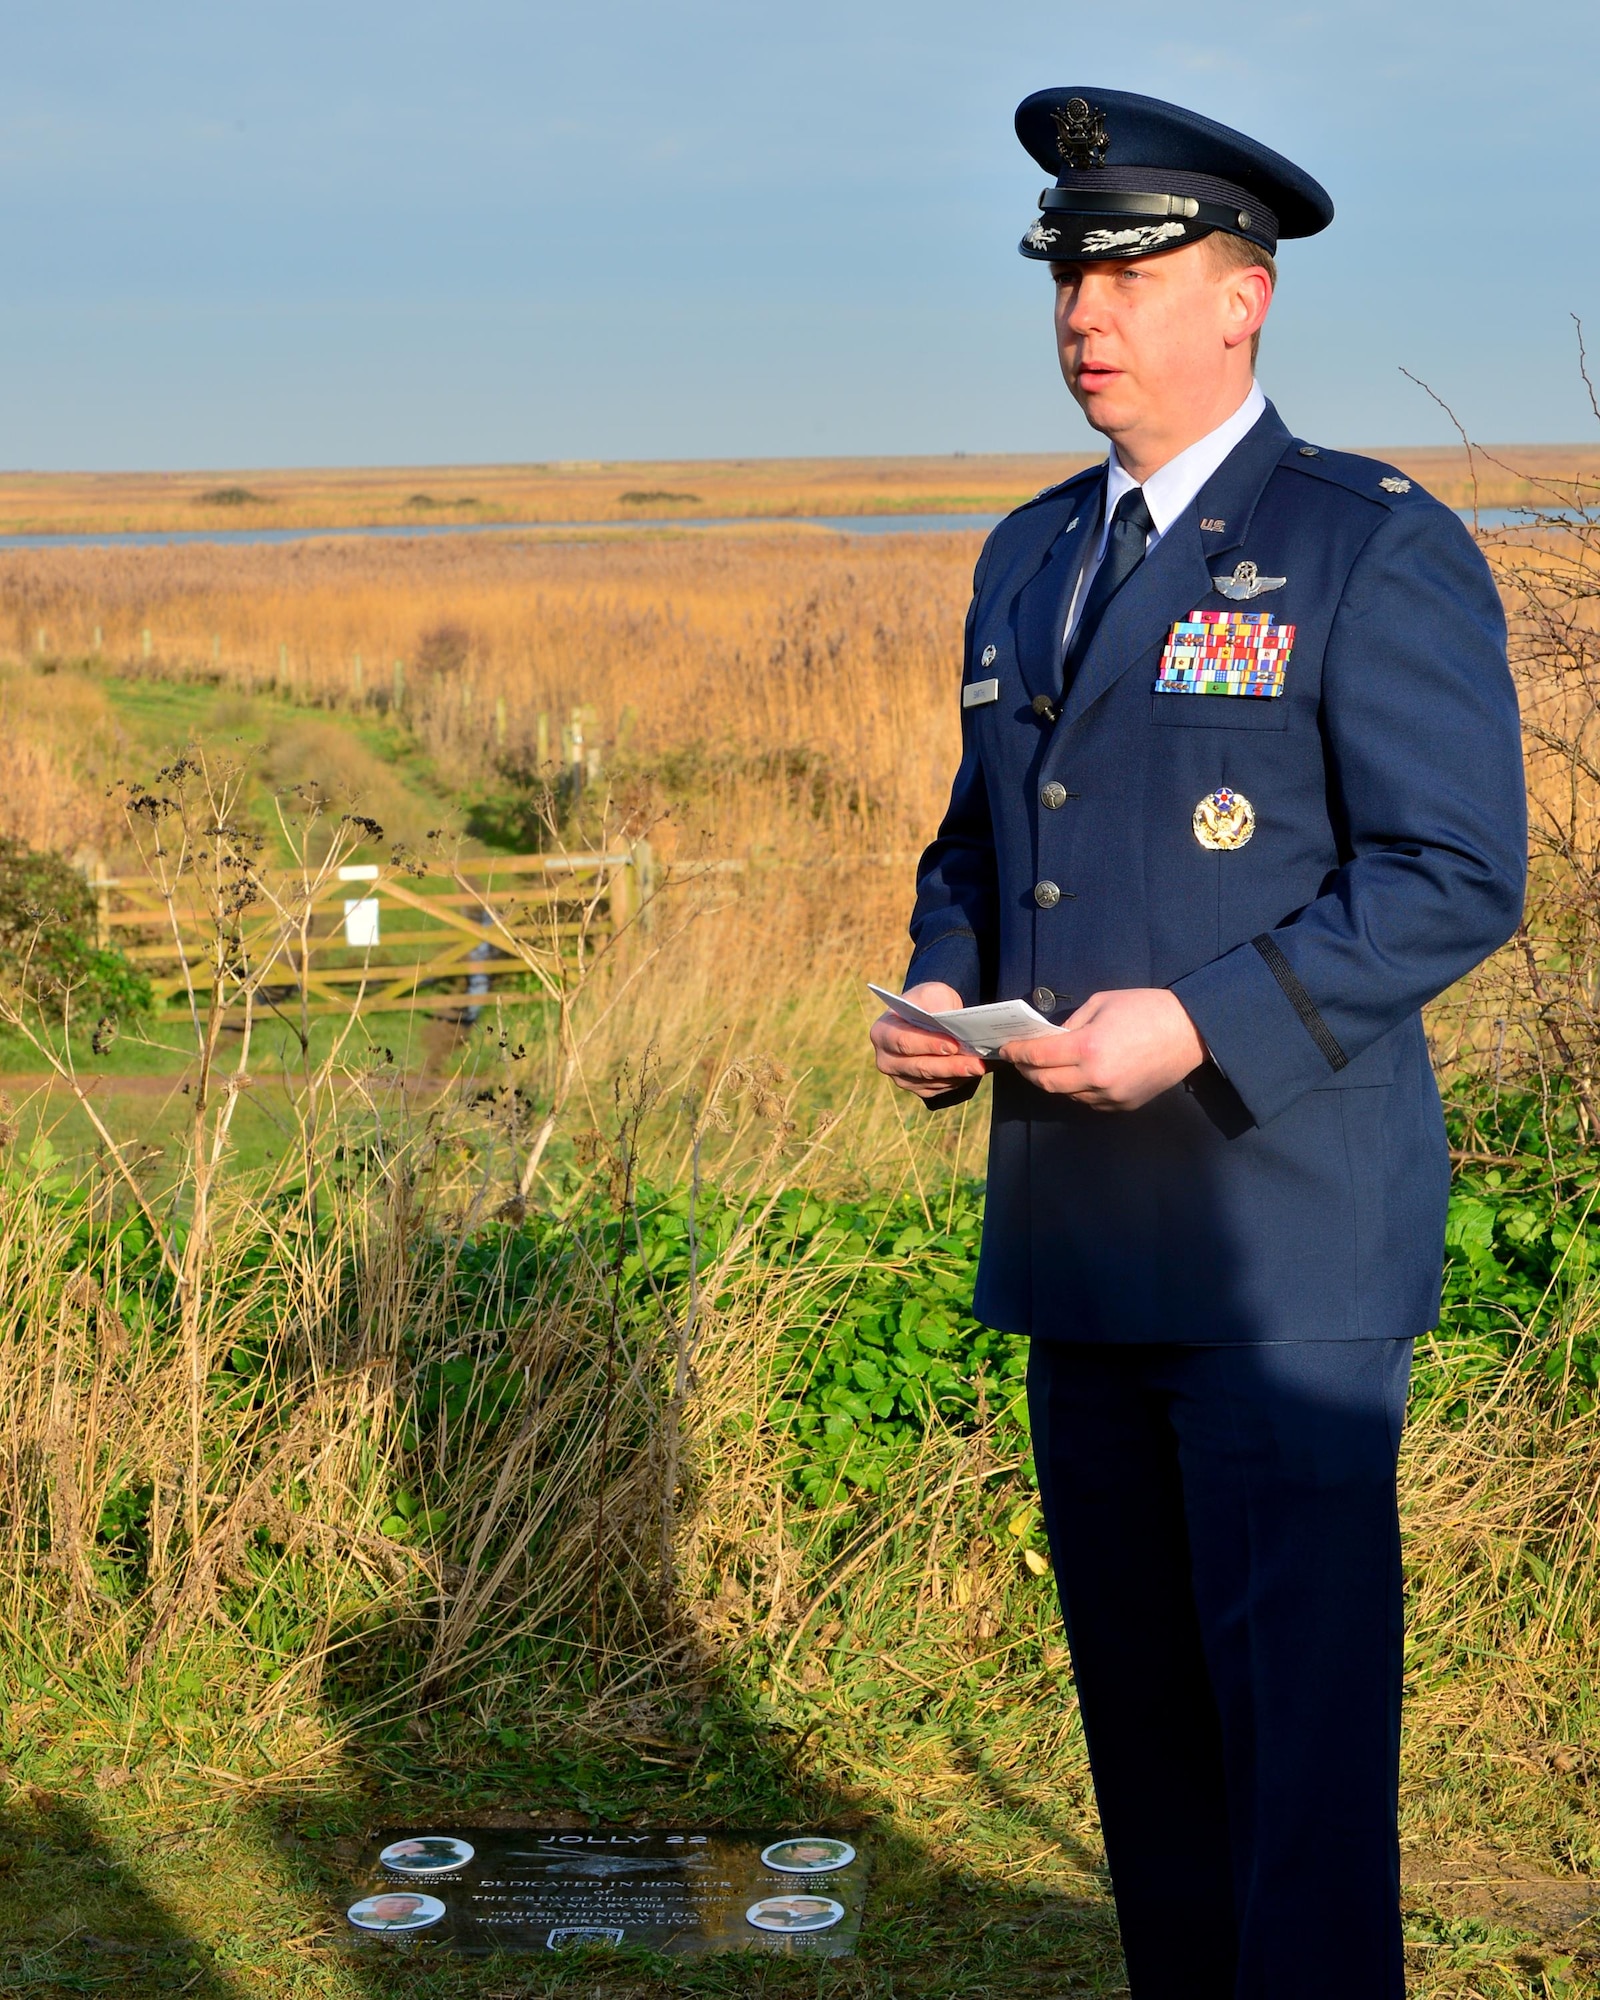 Lt. Col. Bernard Smith, 56th Rescue Squadron commander, speaks during the Jolly 22 memorial dedication, Jan. 6, 2017. Three years ago, the 56th Rescue Squadron and 48th Fighter Wing felt the tragic loss of four Liberty Airmen, when an HH-60G Pave Hawk crashed on the Norfolk coast while participating in a low-level training mission Jan. 7, 2014. (U.S. Air Force photo/Staff Sgt. Stephanie Longoria)